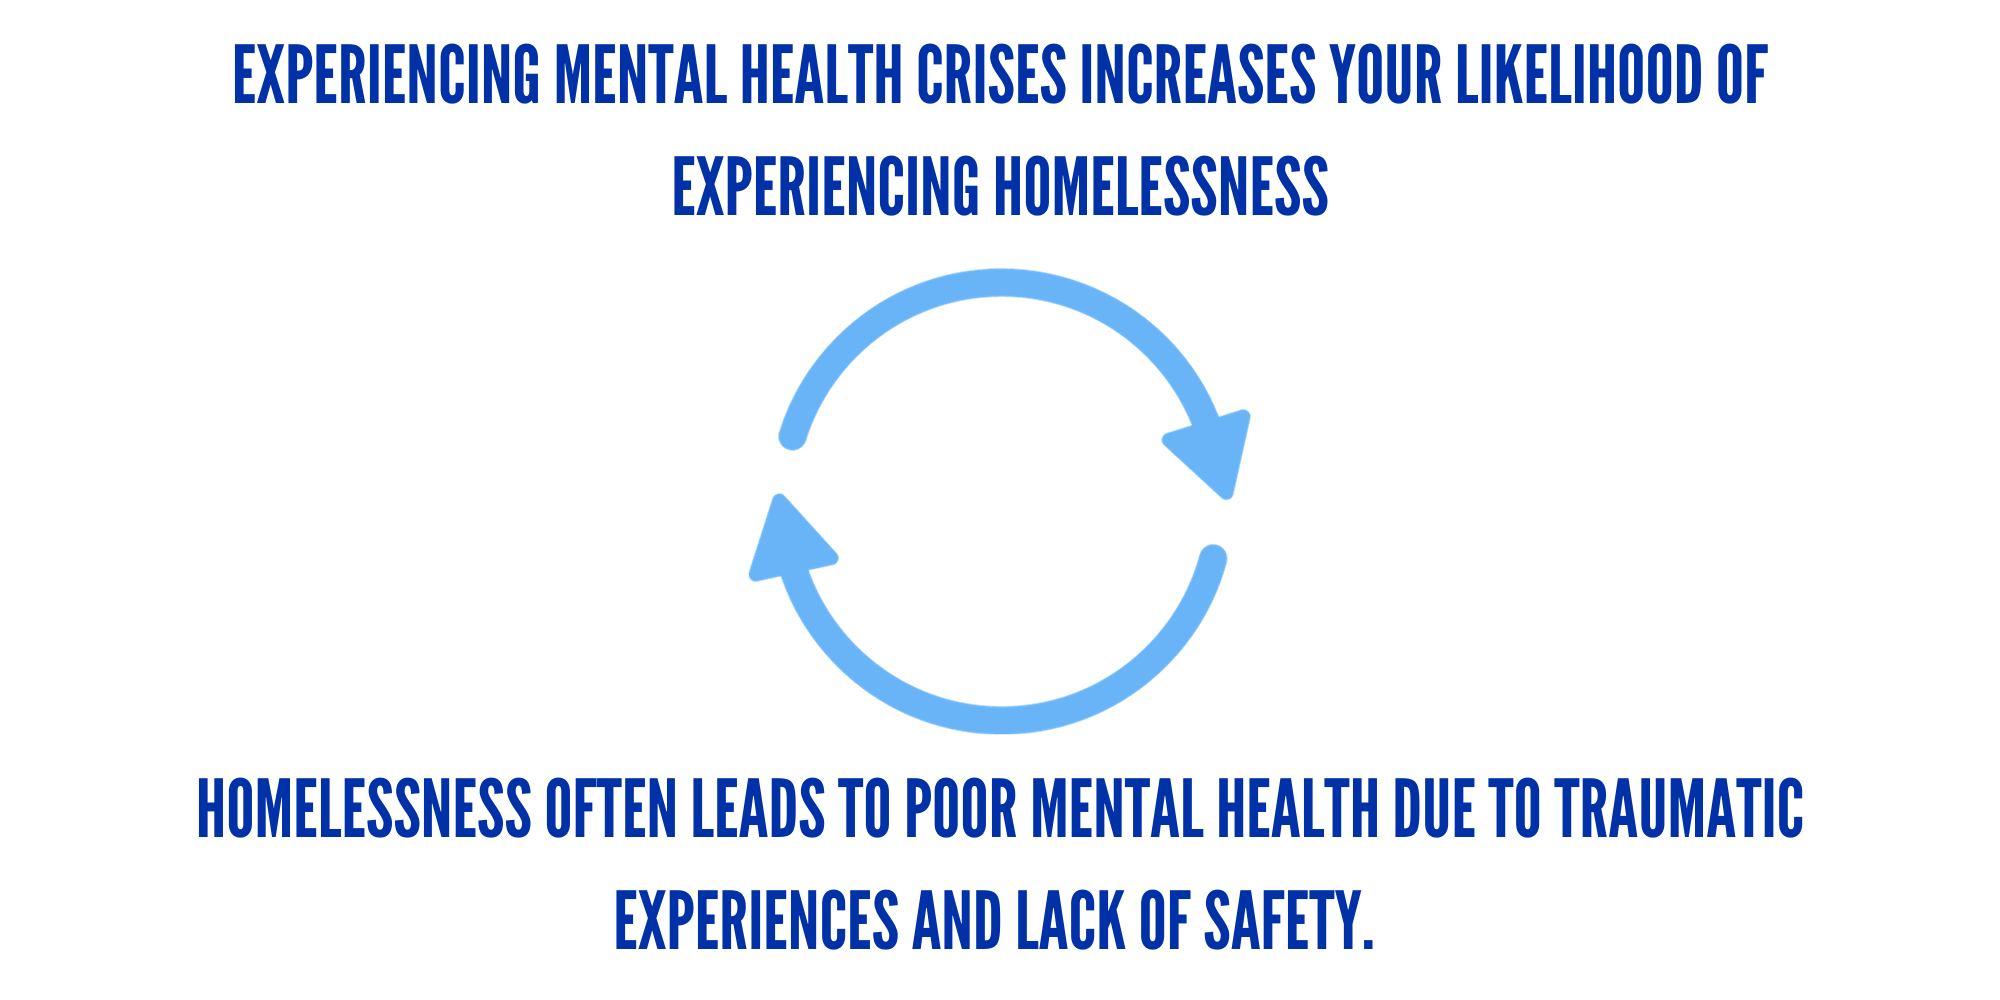 mental health and homelessness cycle graphic